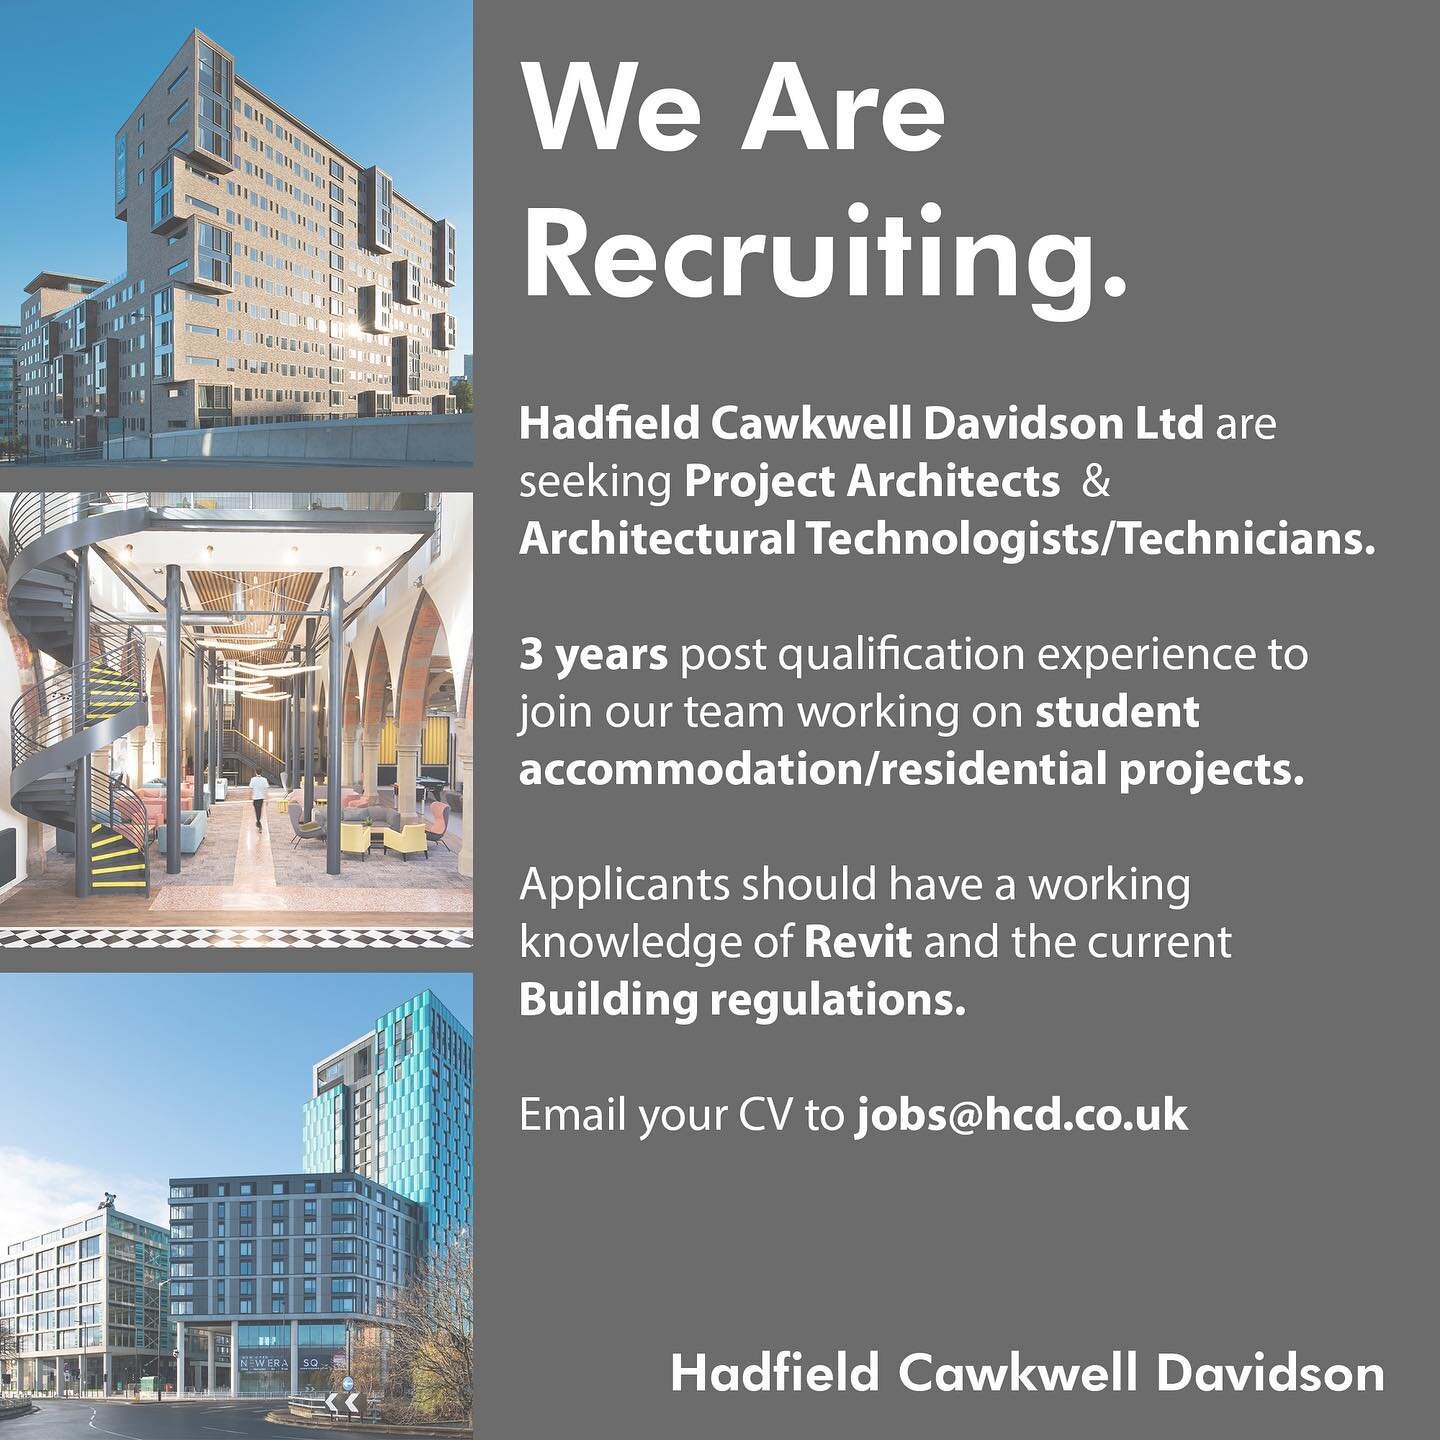 We are looking for Project Architects &amp;&nbsp;Architectural Technicians/Technologists&nbsp;to join our multi-disciplinary professional team in Sheffield working on projects for new build and refurb residential/student accommodation.

Hadfield Cawk